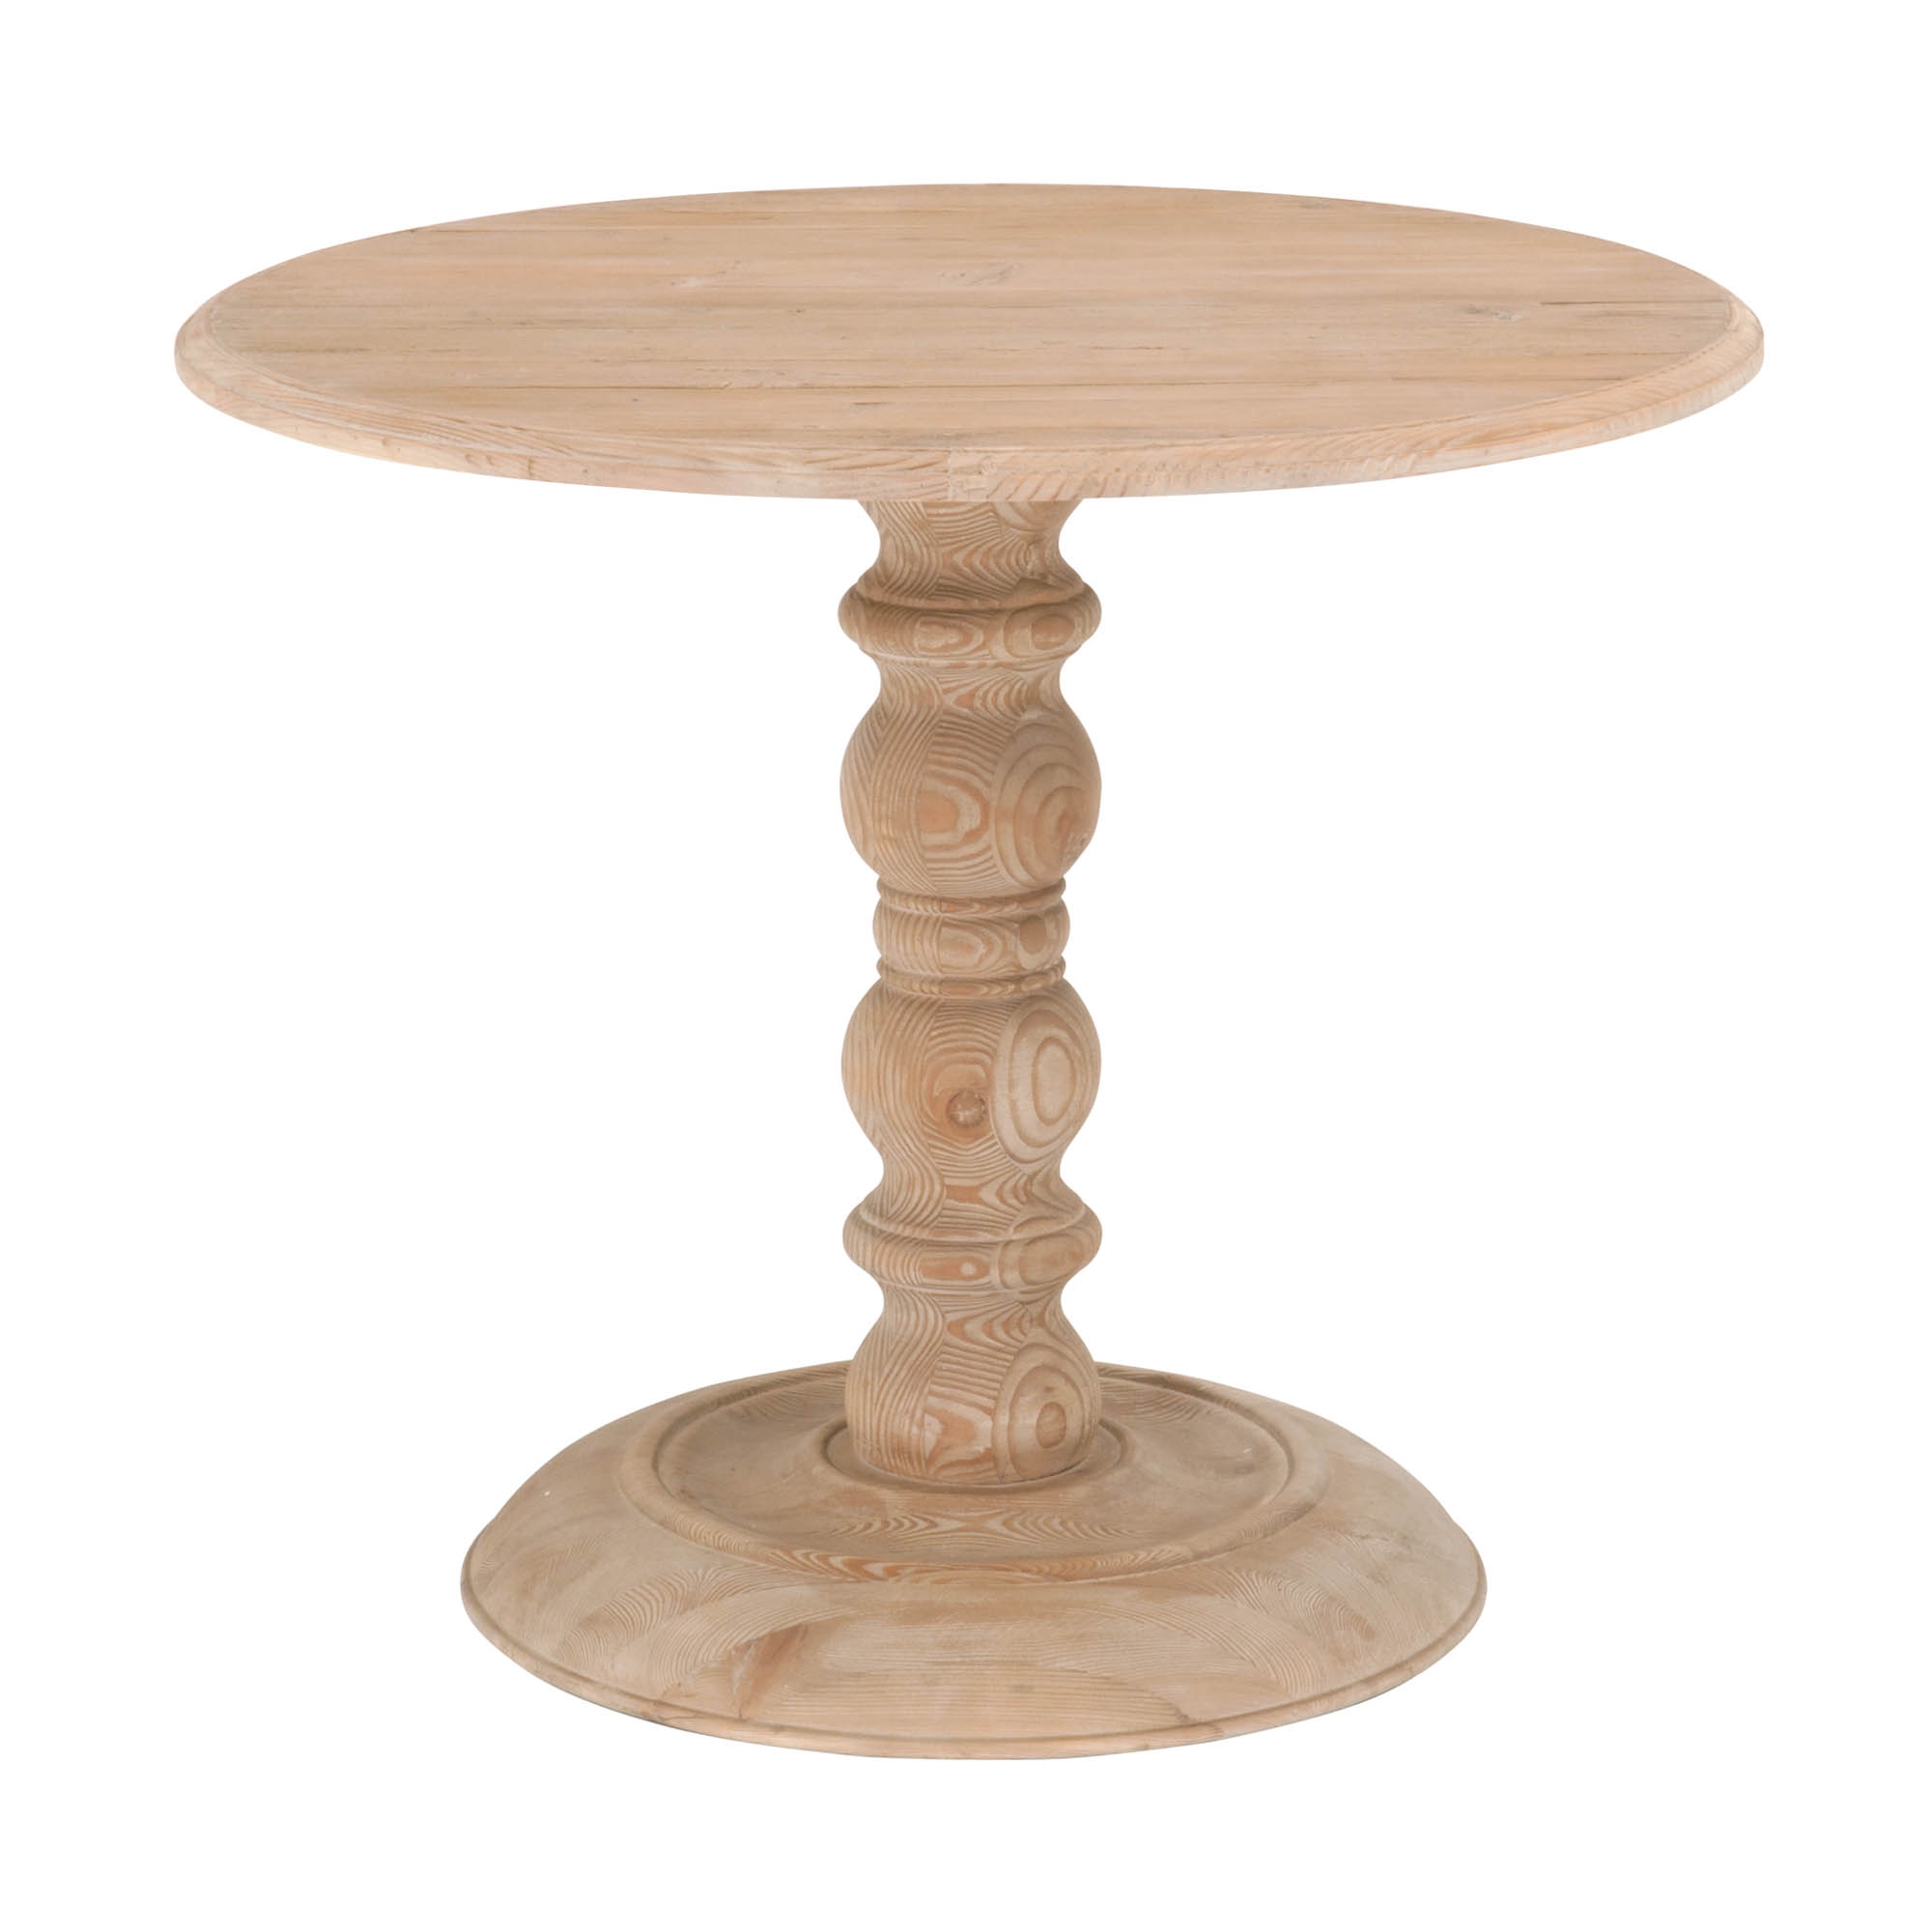 CHELSEA 36" ROUND DINING TABLE - Image 1